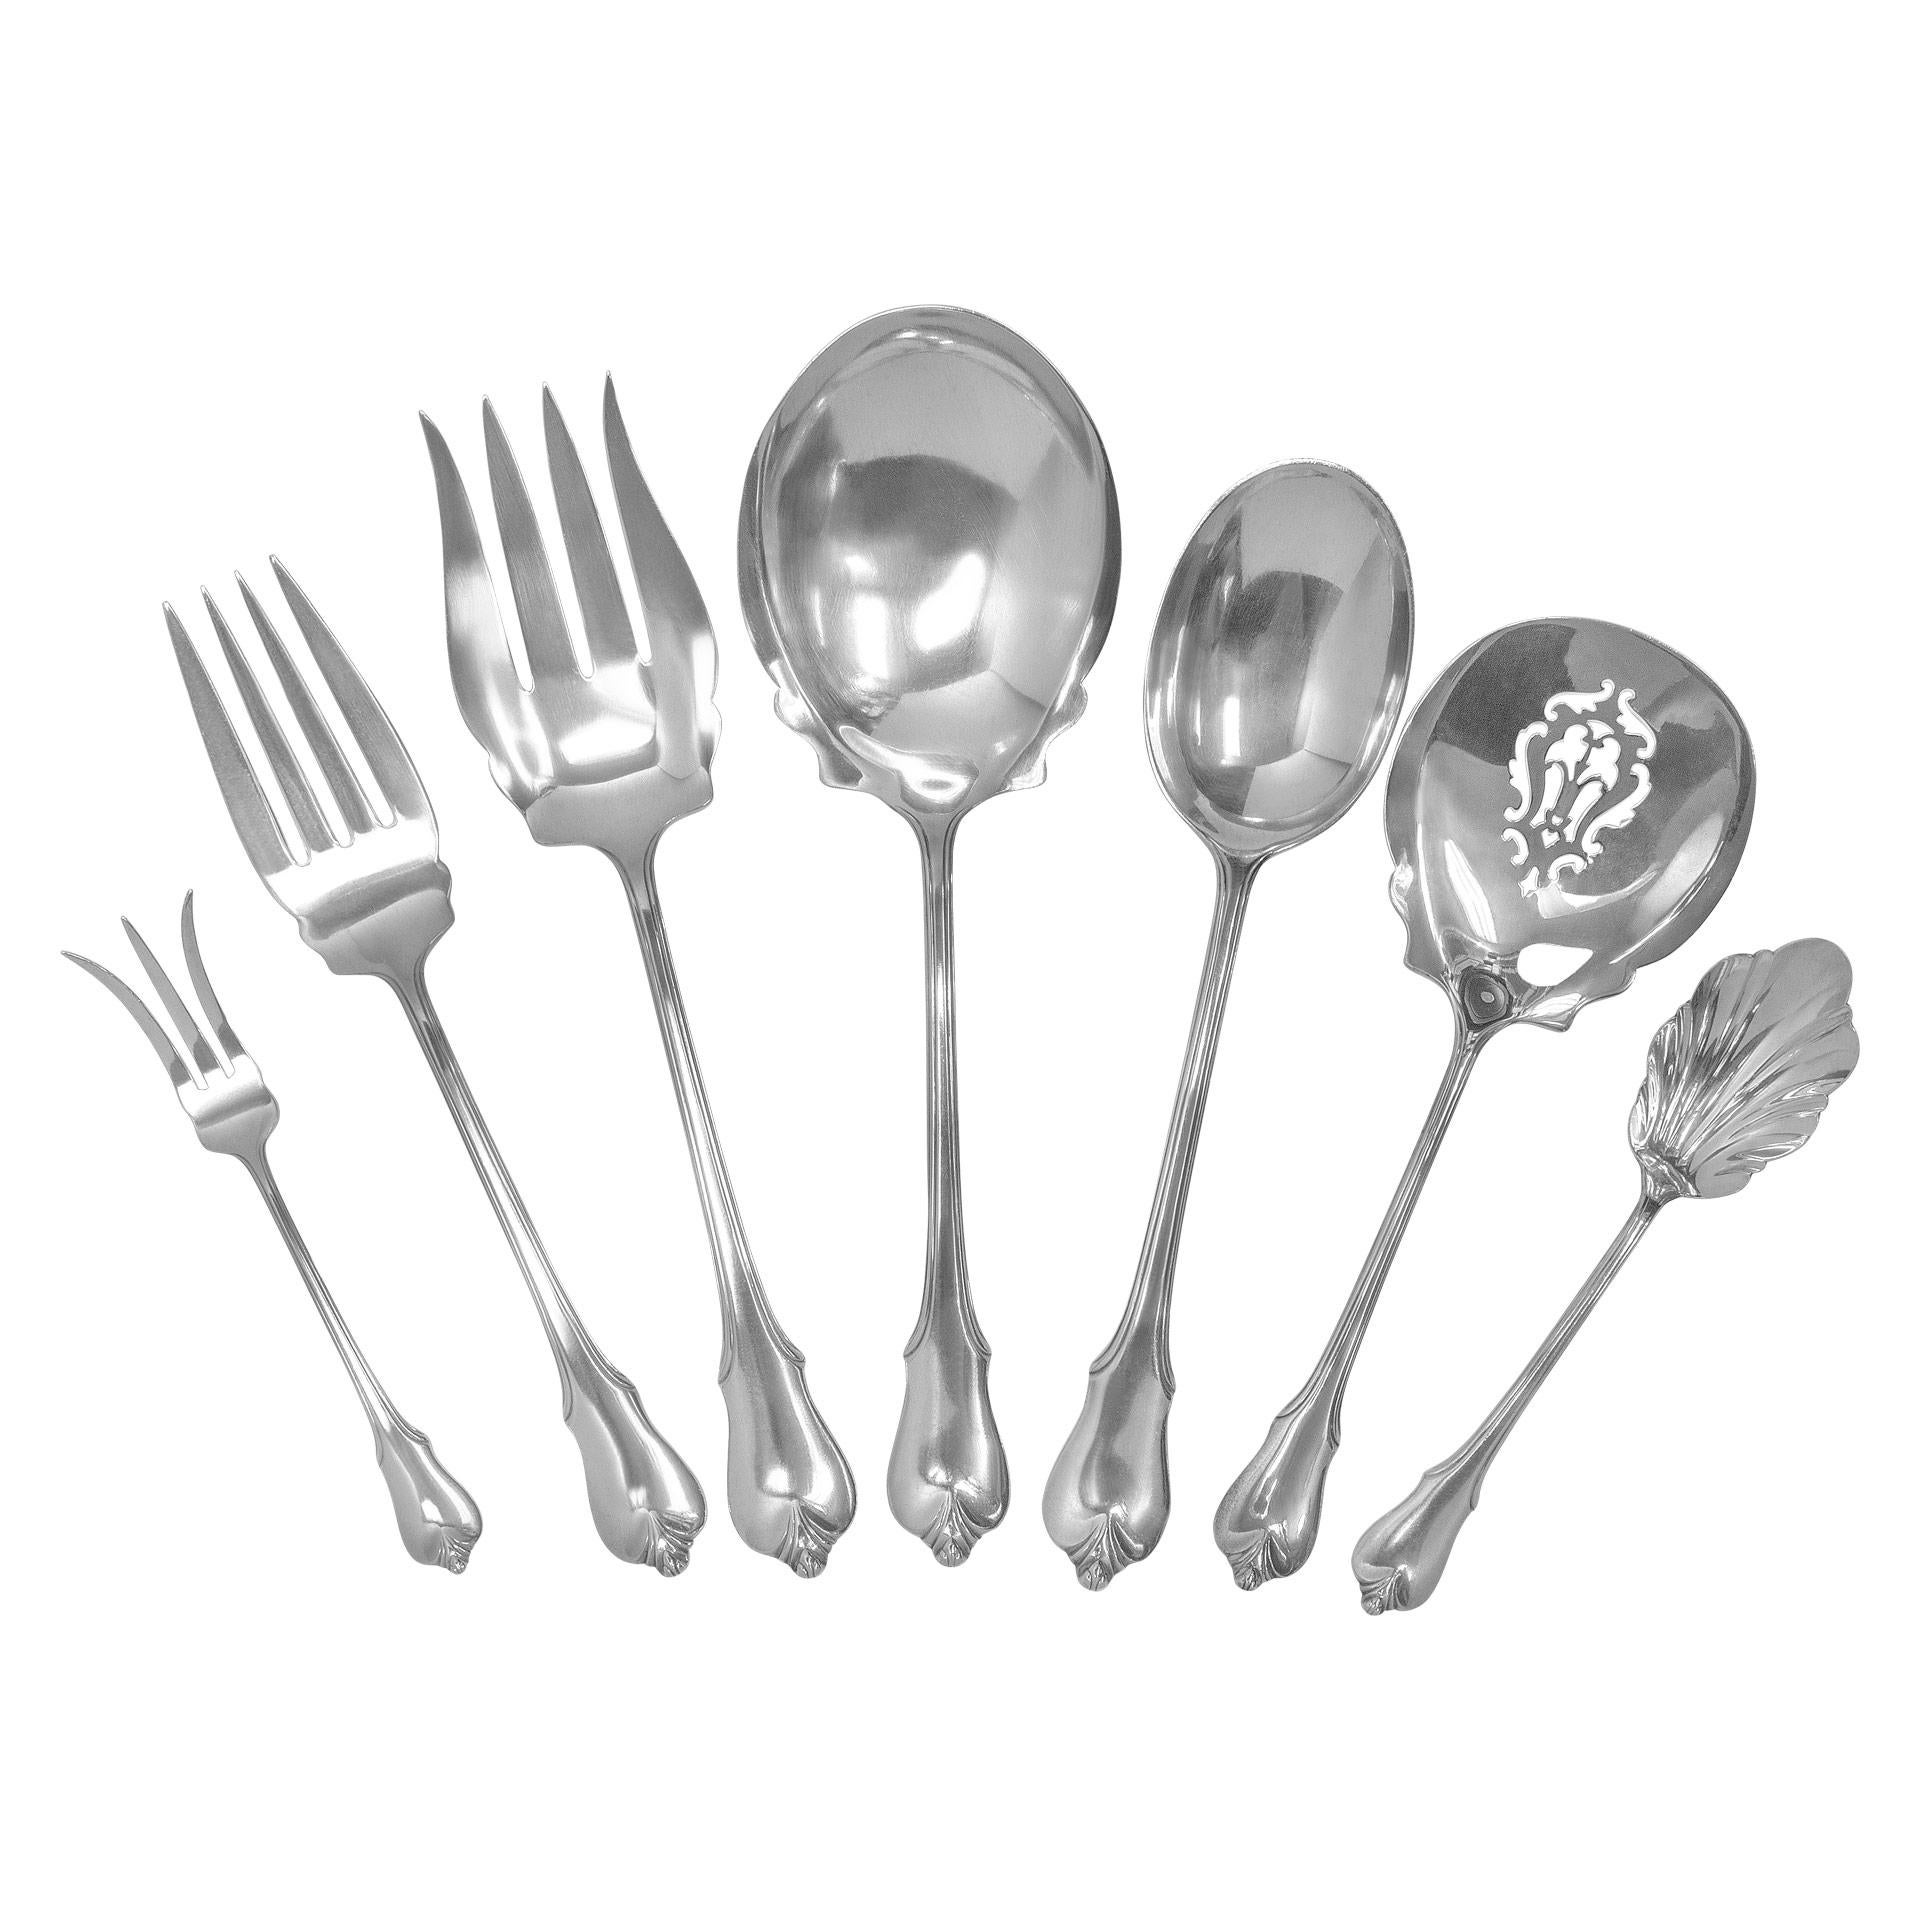 GRAND COLONIAL sterling silver flatware set patented in 1942 by WALLACE. 9 Places Setting for 12 (Dinner & lunch) + 7 Serving Pieces- Over 4200 grams sterling silver. PLACE SETTINGS: 12 Dinner Knives (9 3/4